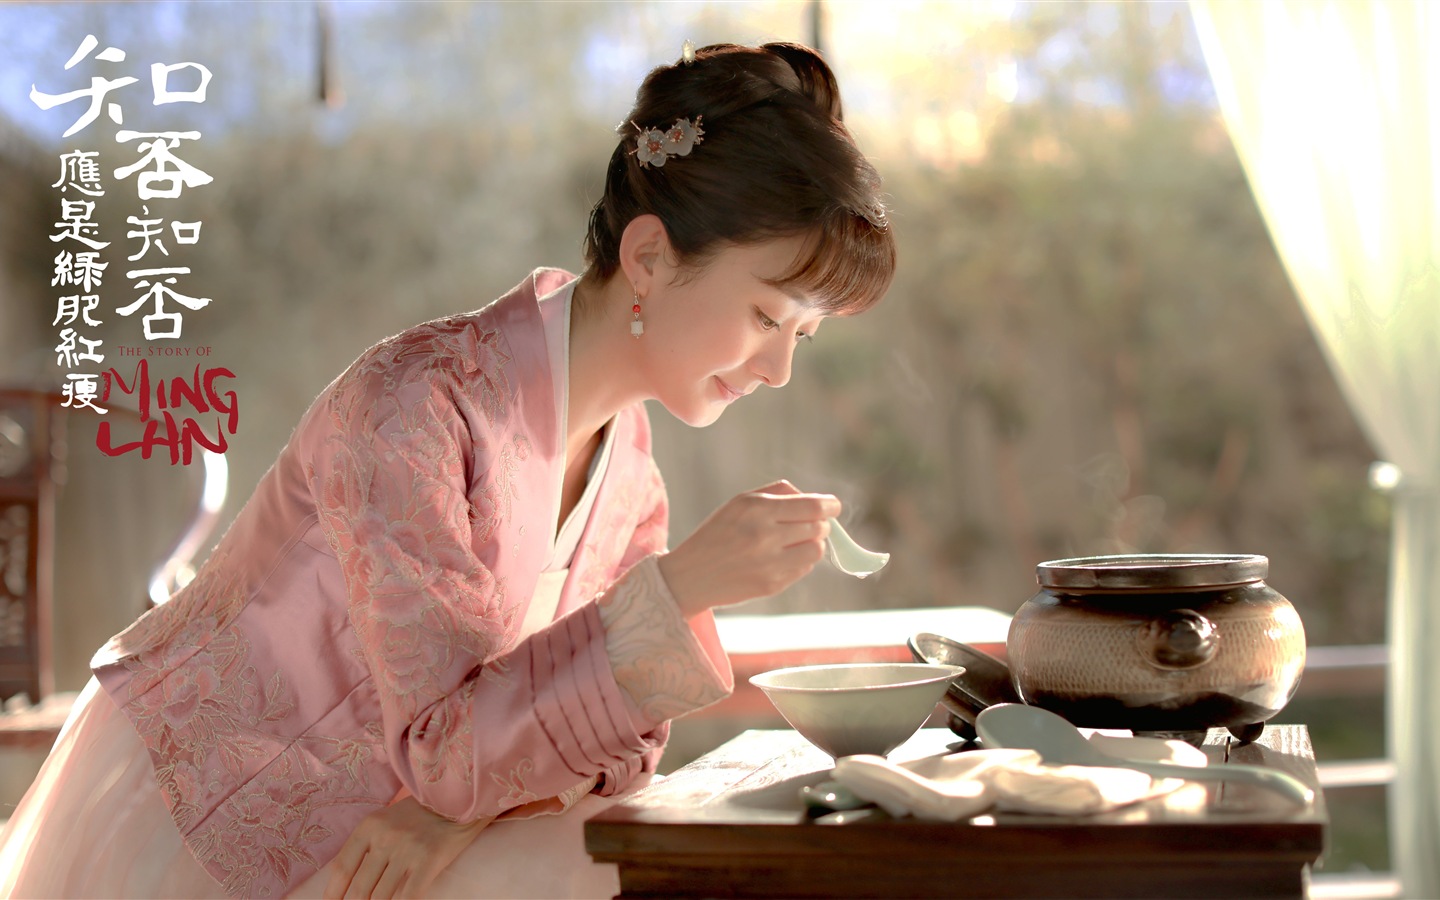 The Story Of MingLan, TV series HD wallpapers #29 - 1440x900